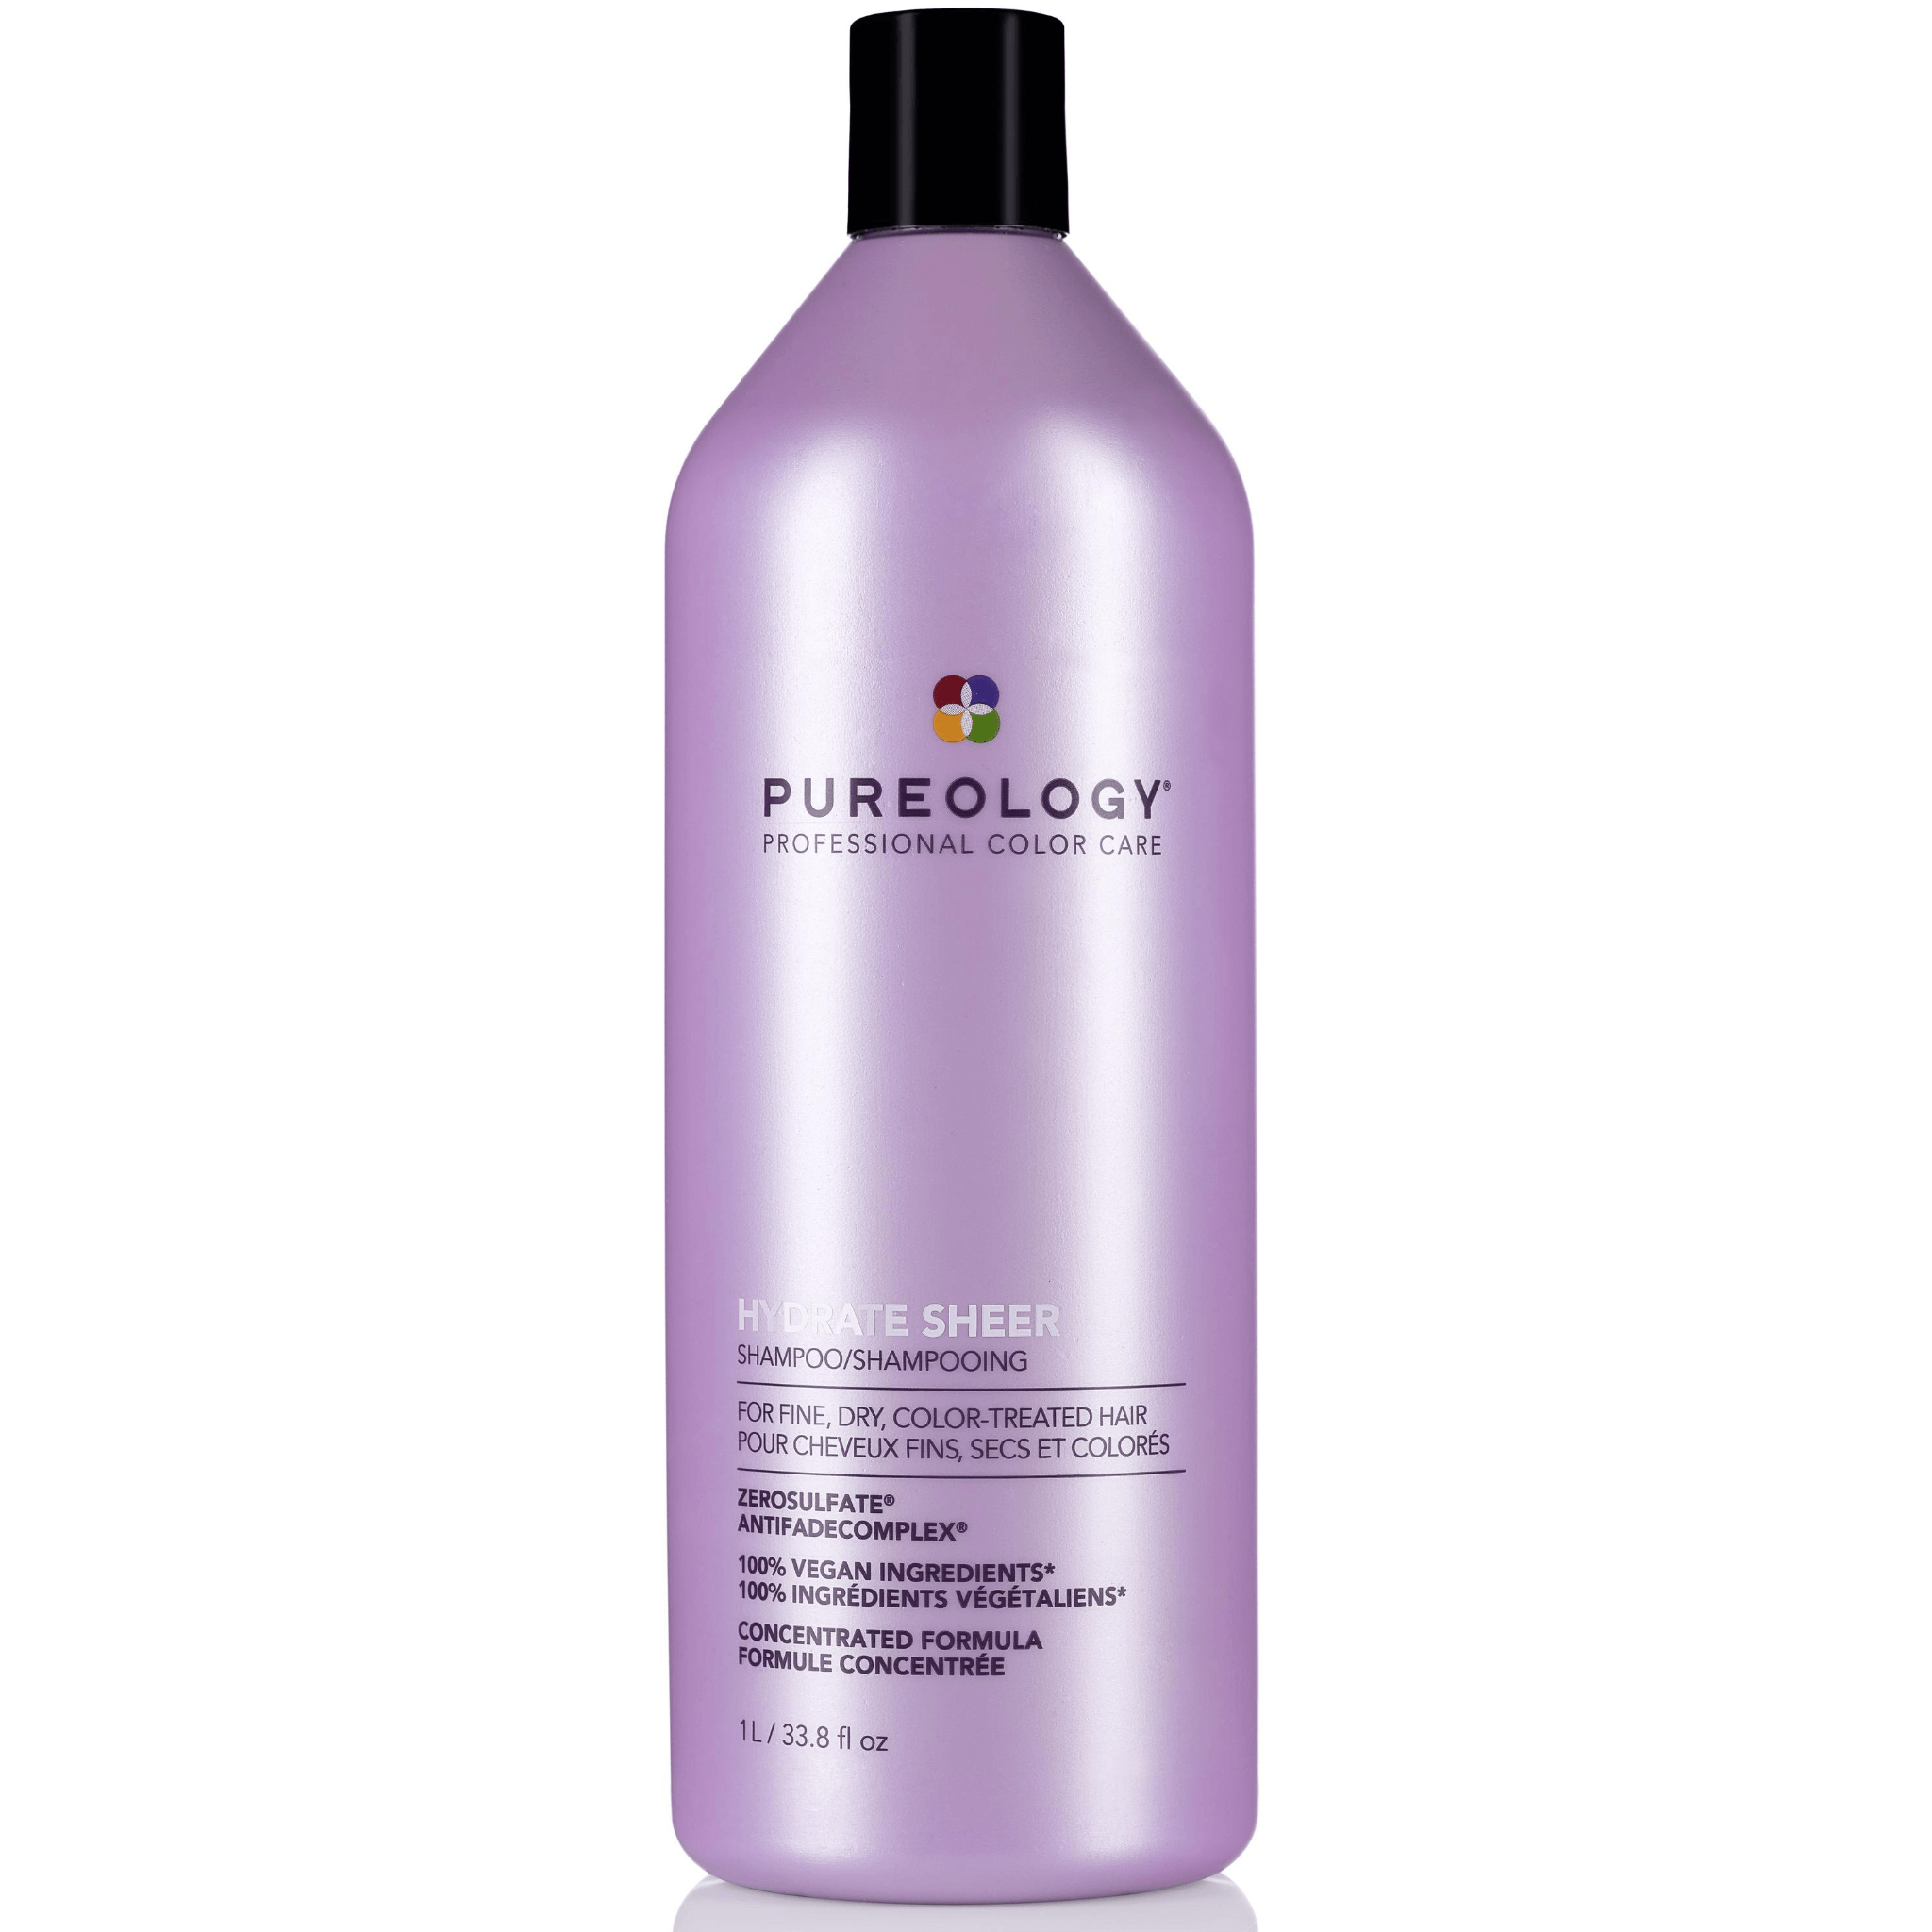 Pureology. Shampoing Hydrate Sheer - 1000 ml - Concept C. Shop